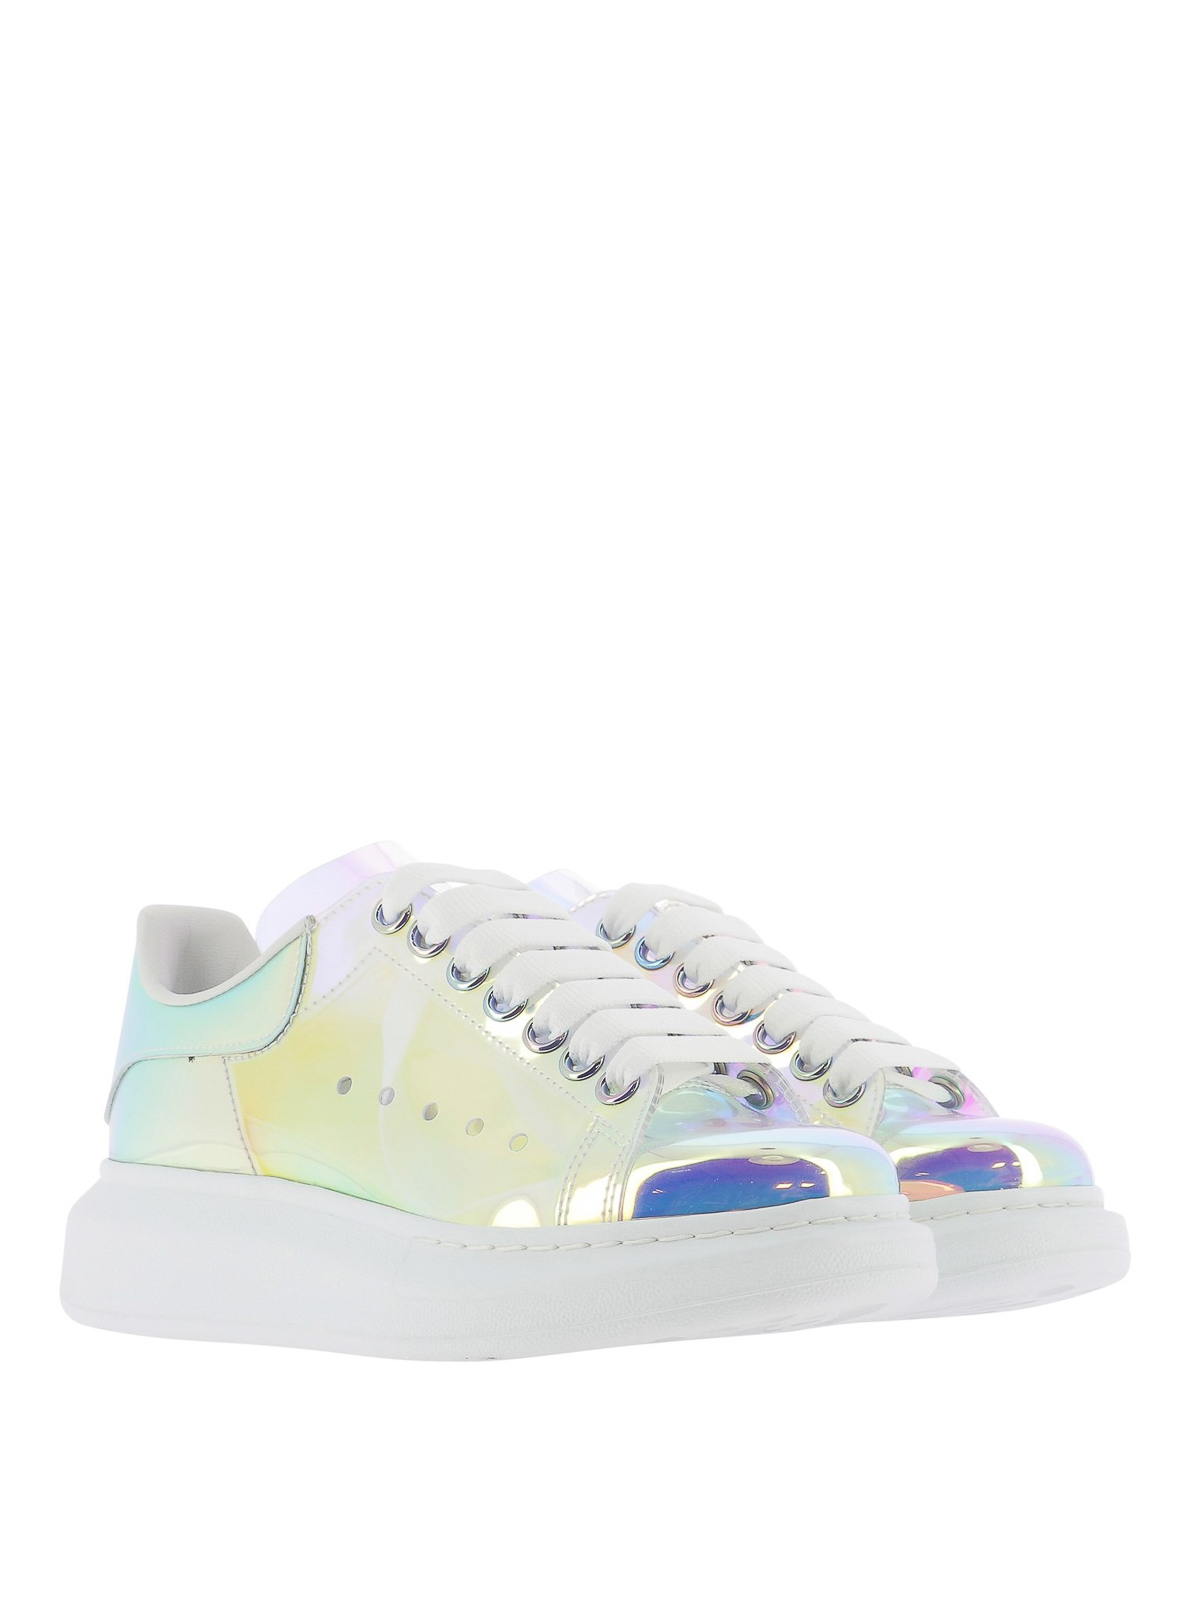 Foot Ideals Ph - Alexander McQueen oversized iridescent sneakers. Available  in 38, 39, 40 & 41 eur. Price @29,000 . #alexandermcqueen  #alexandermcqueensneakers | Facebook